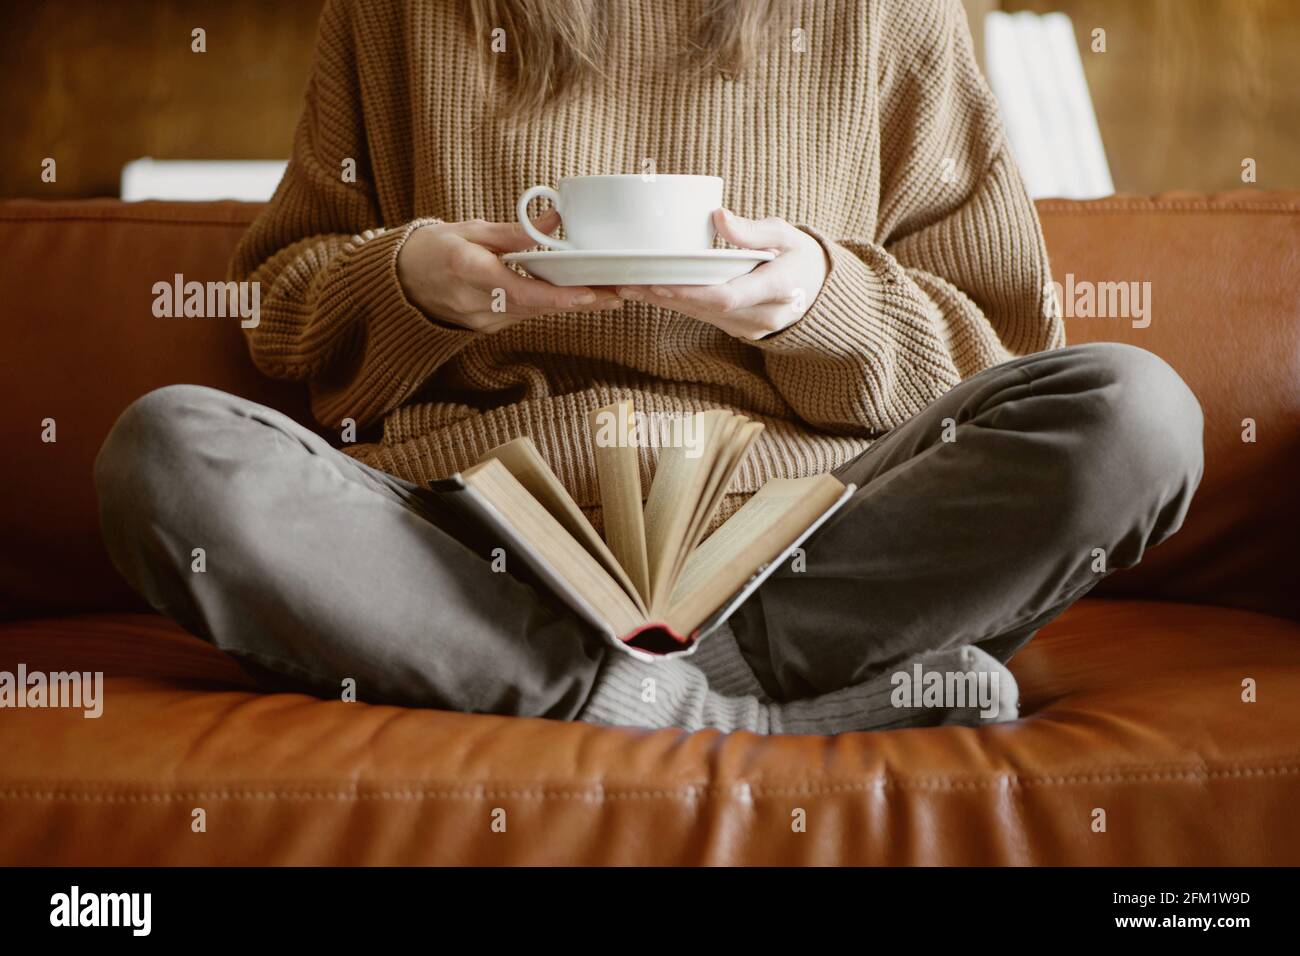 Cropped image of woman sitting on the couch holding cup of tea and reading a book. Stock Photo